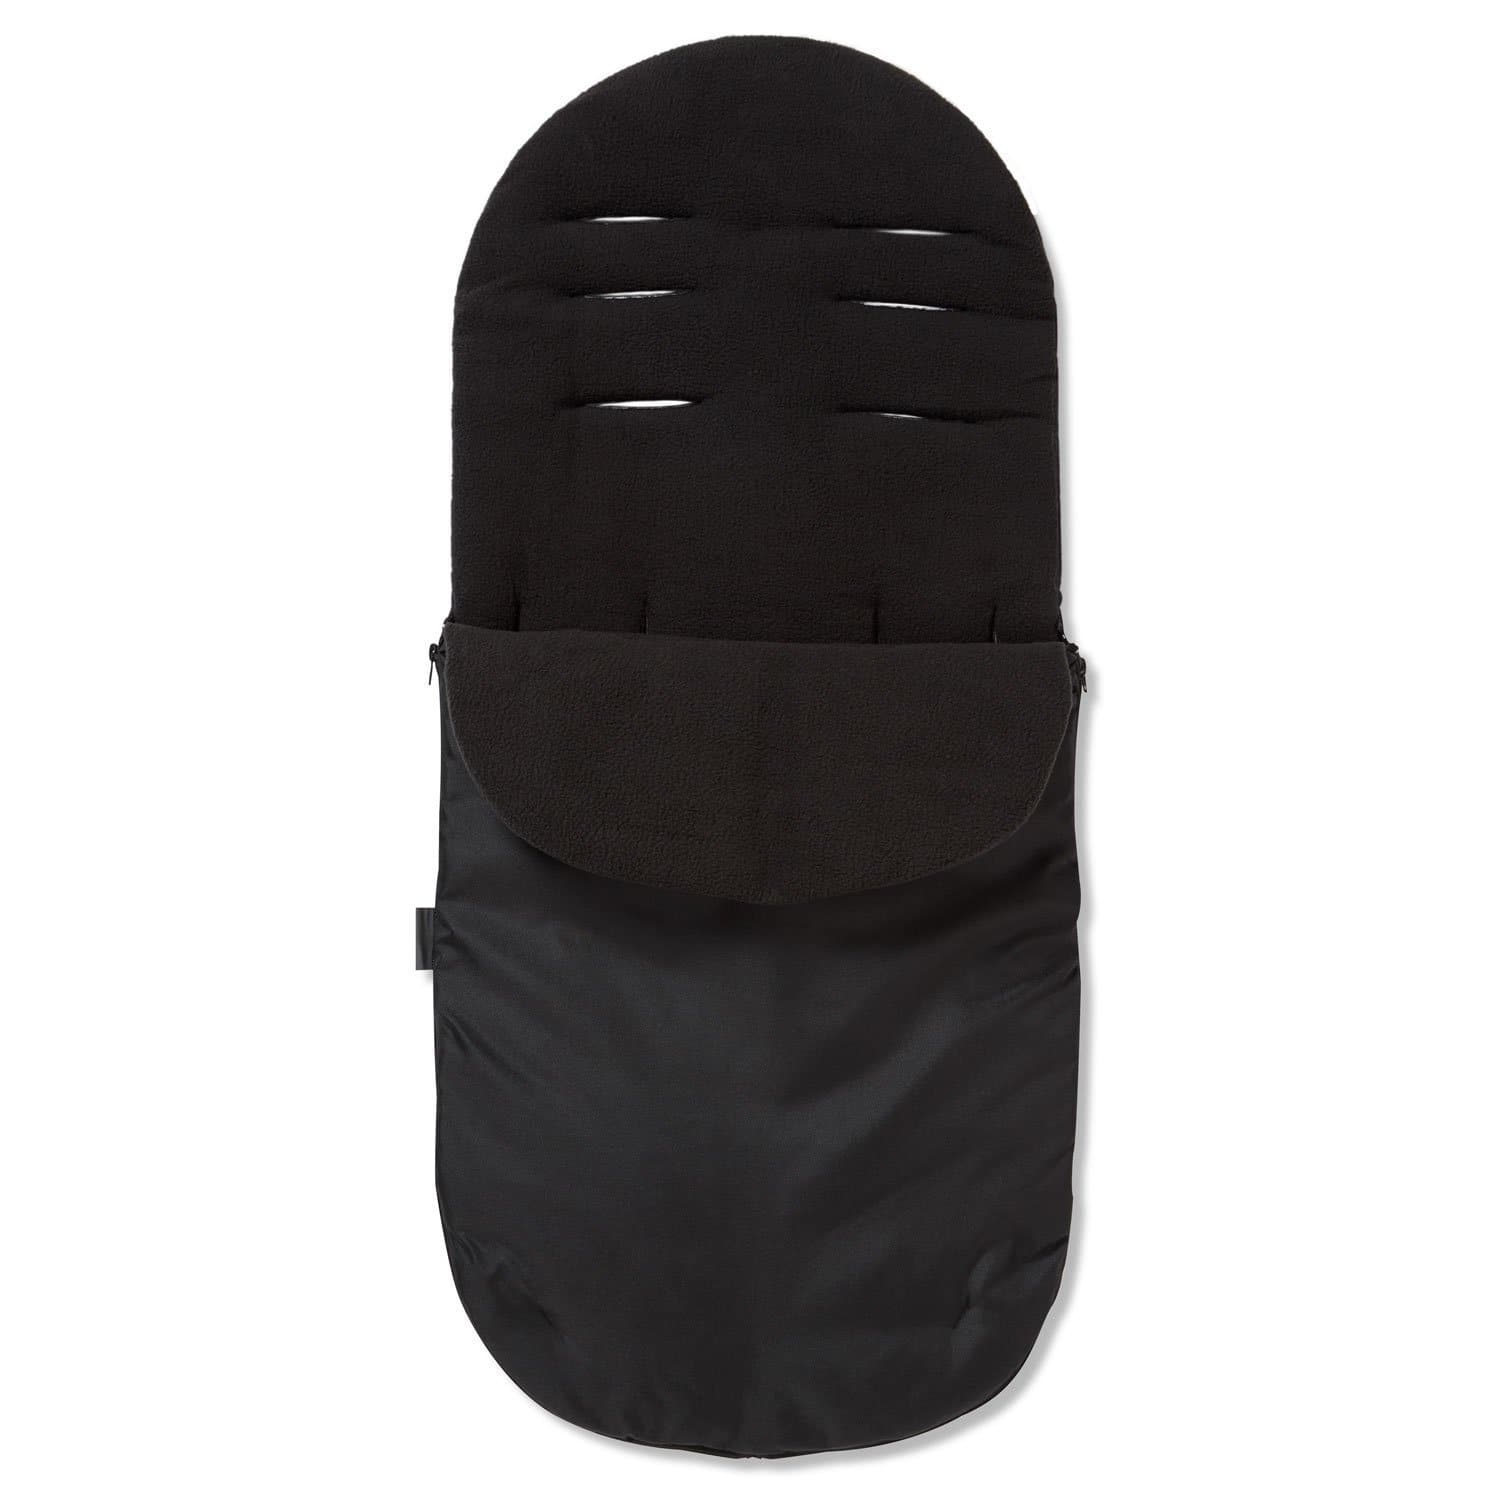 Footmuff / Cosy Toes Compatible with Bumbleride - Black / Fits All Models | For Your Little One